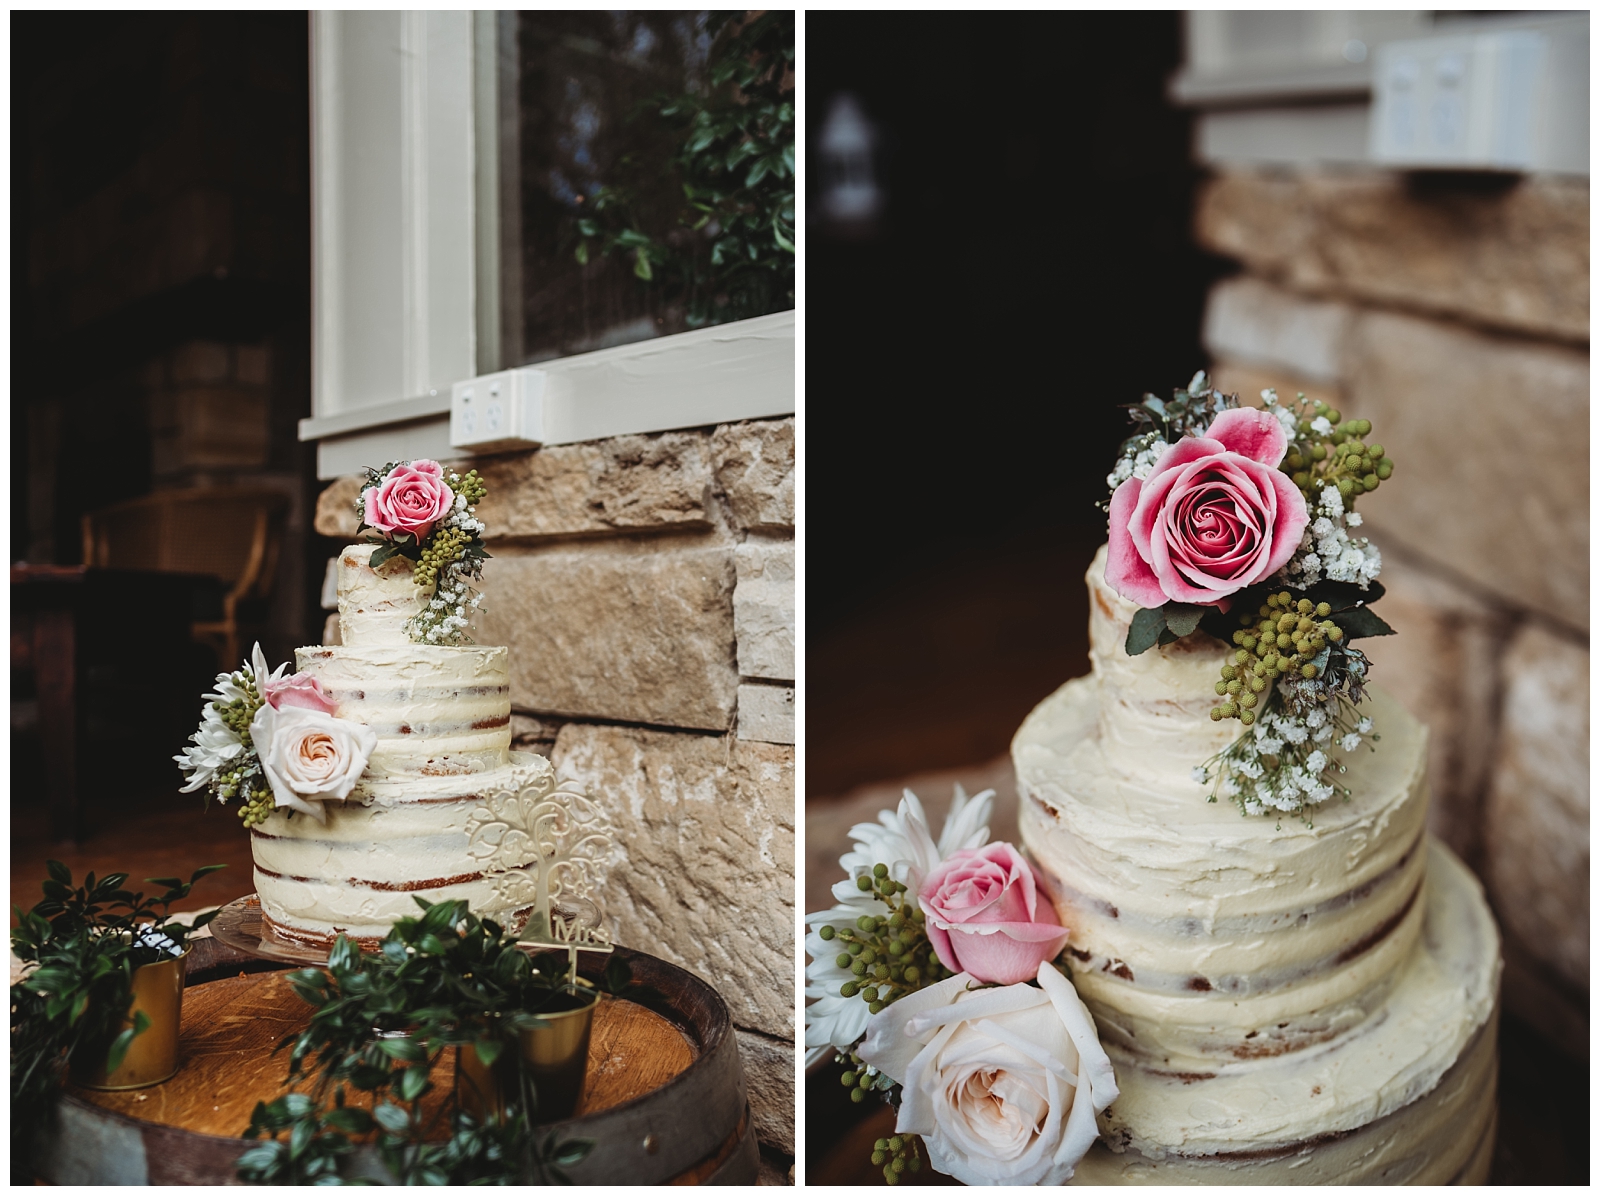 Three teir semi naked wedding cake with fresh pink and white roses.